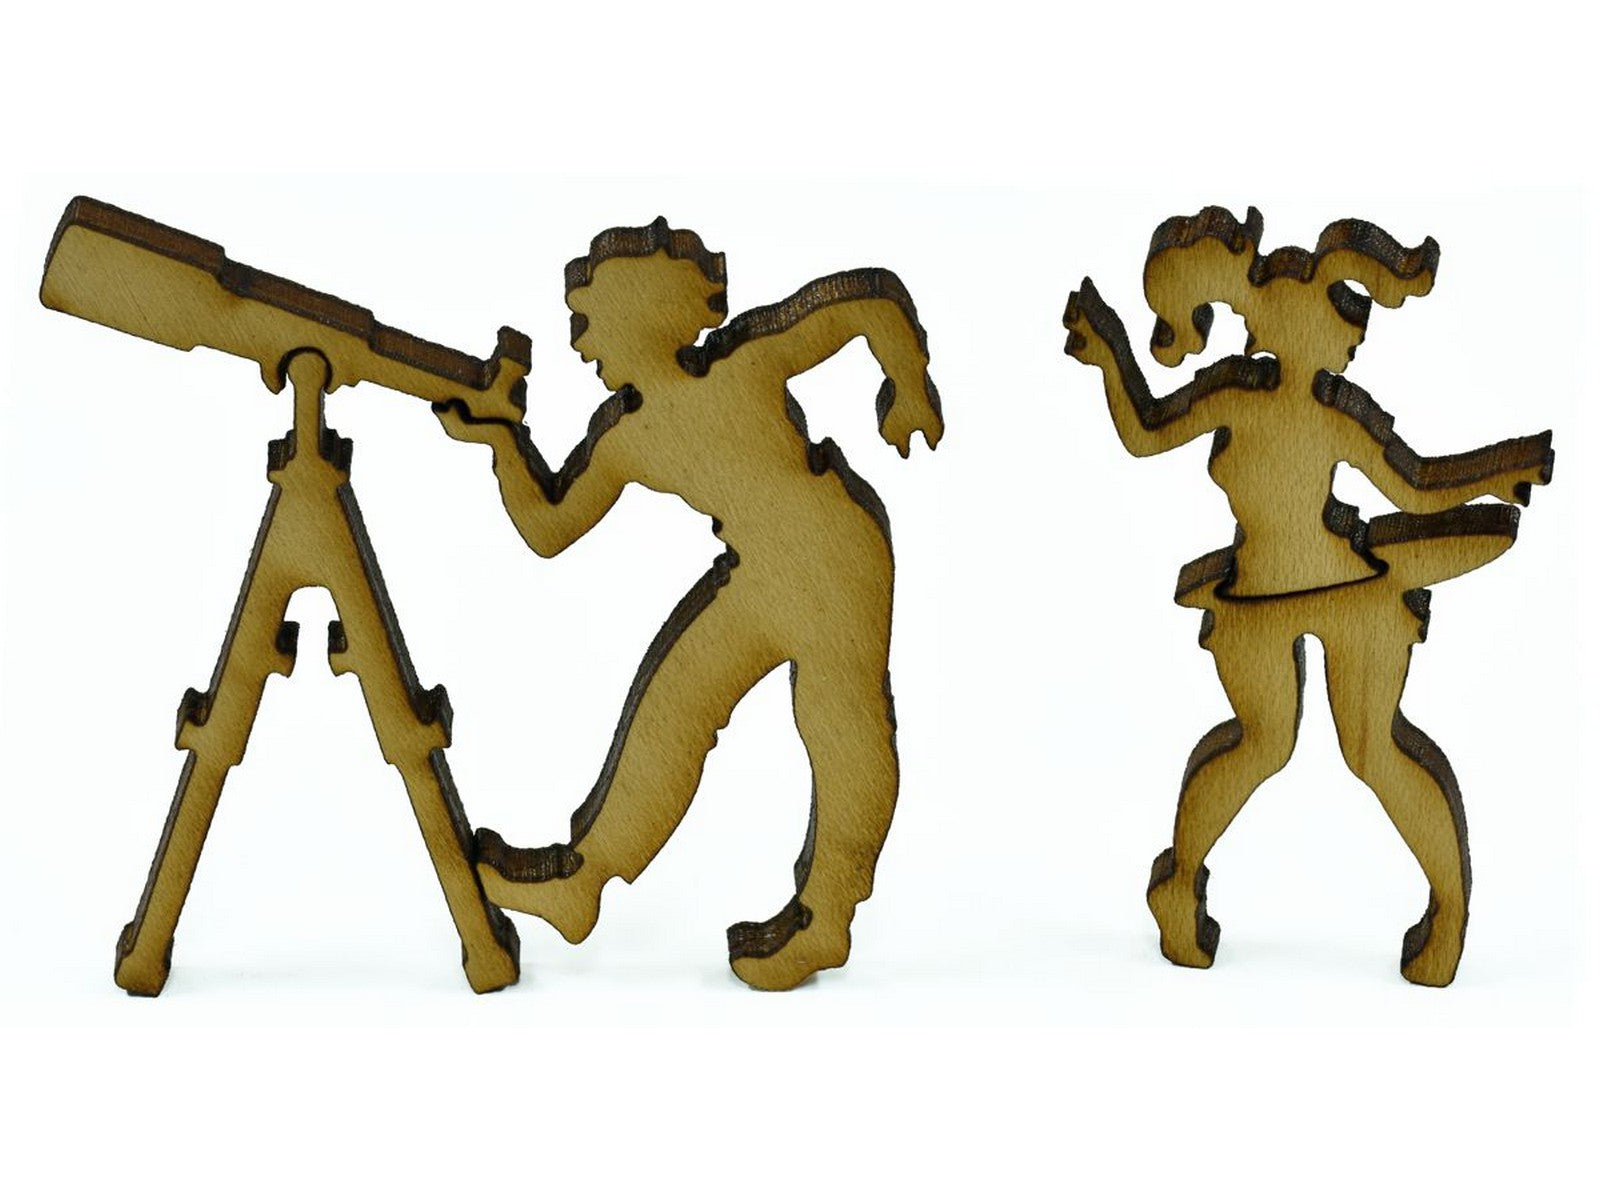 A closeup of pieces in the shape of a person looking through a telescope, and a person hula hooping.